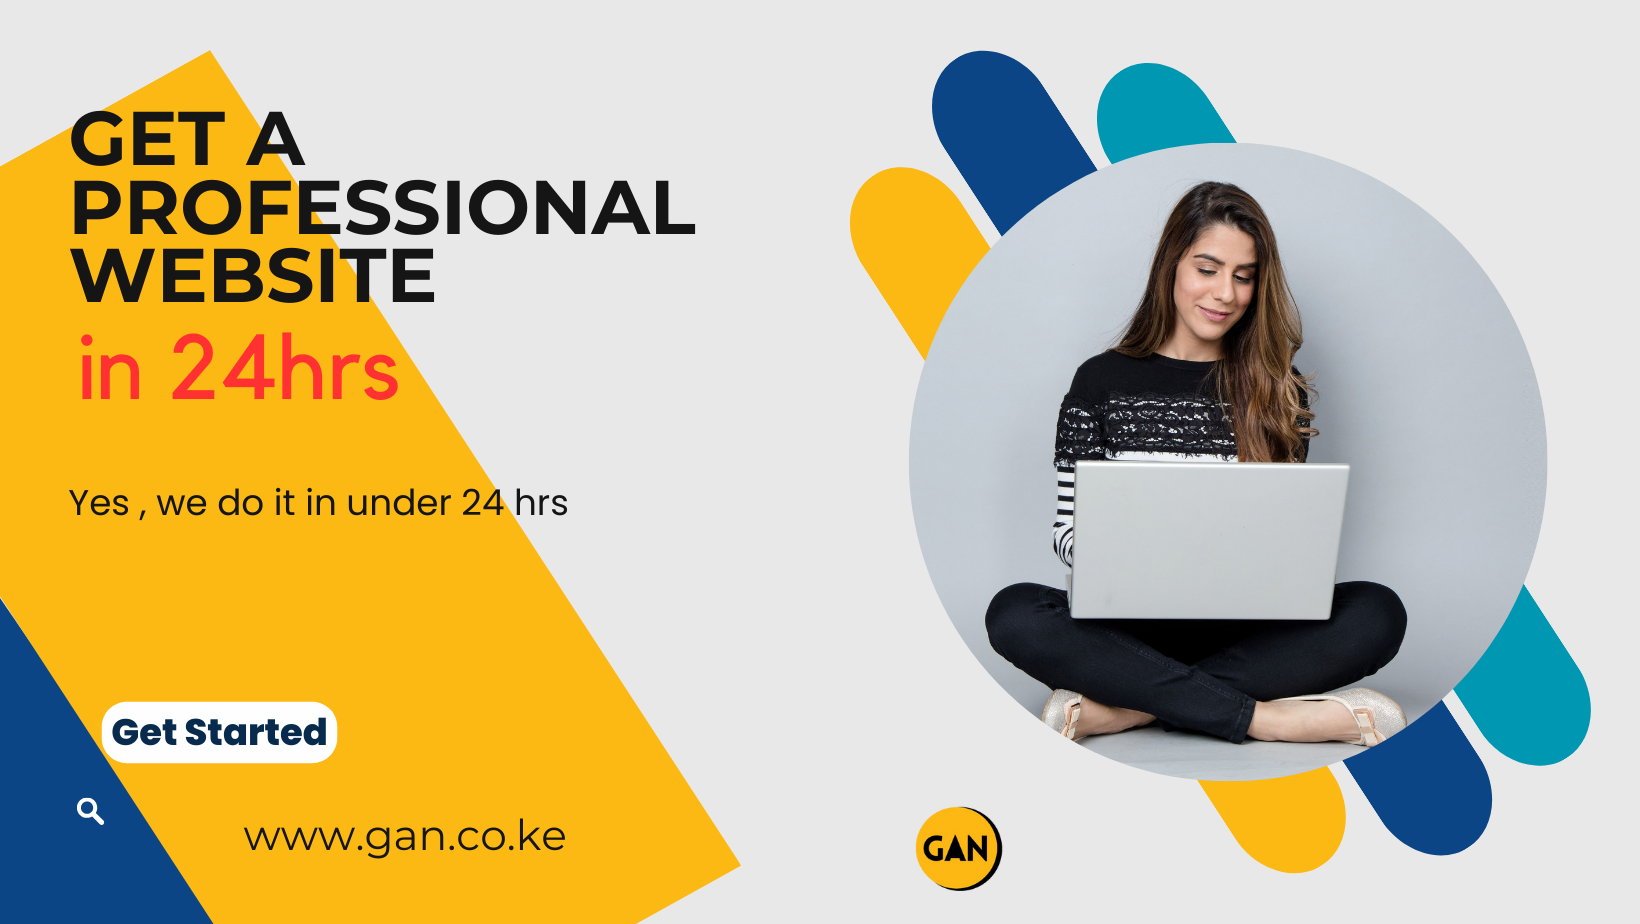 Get a professional Website in 24 hrs